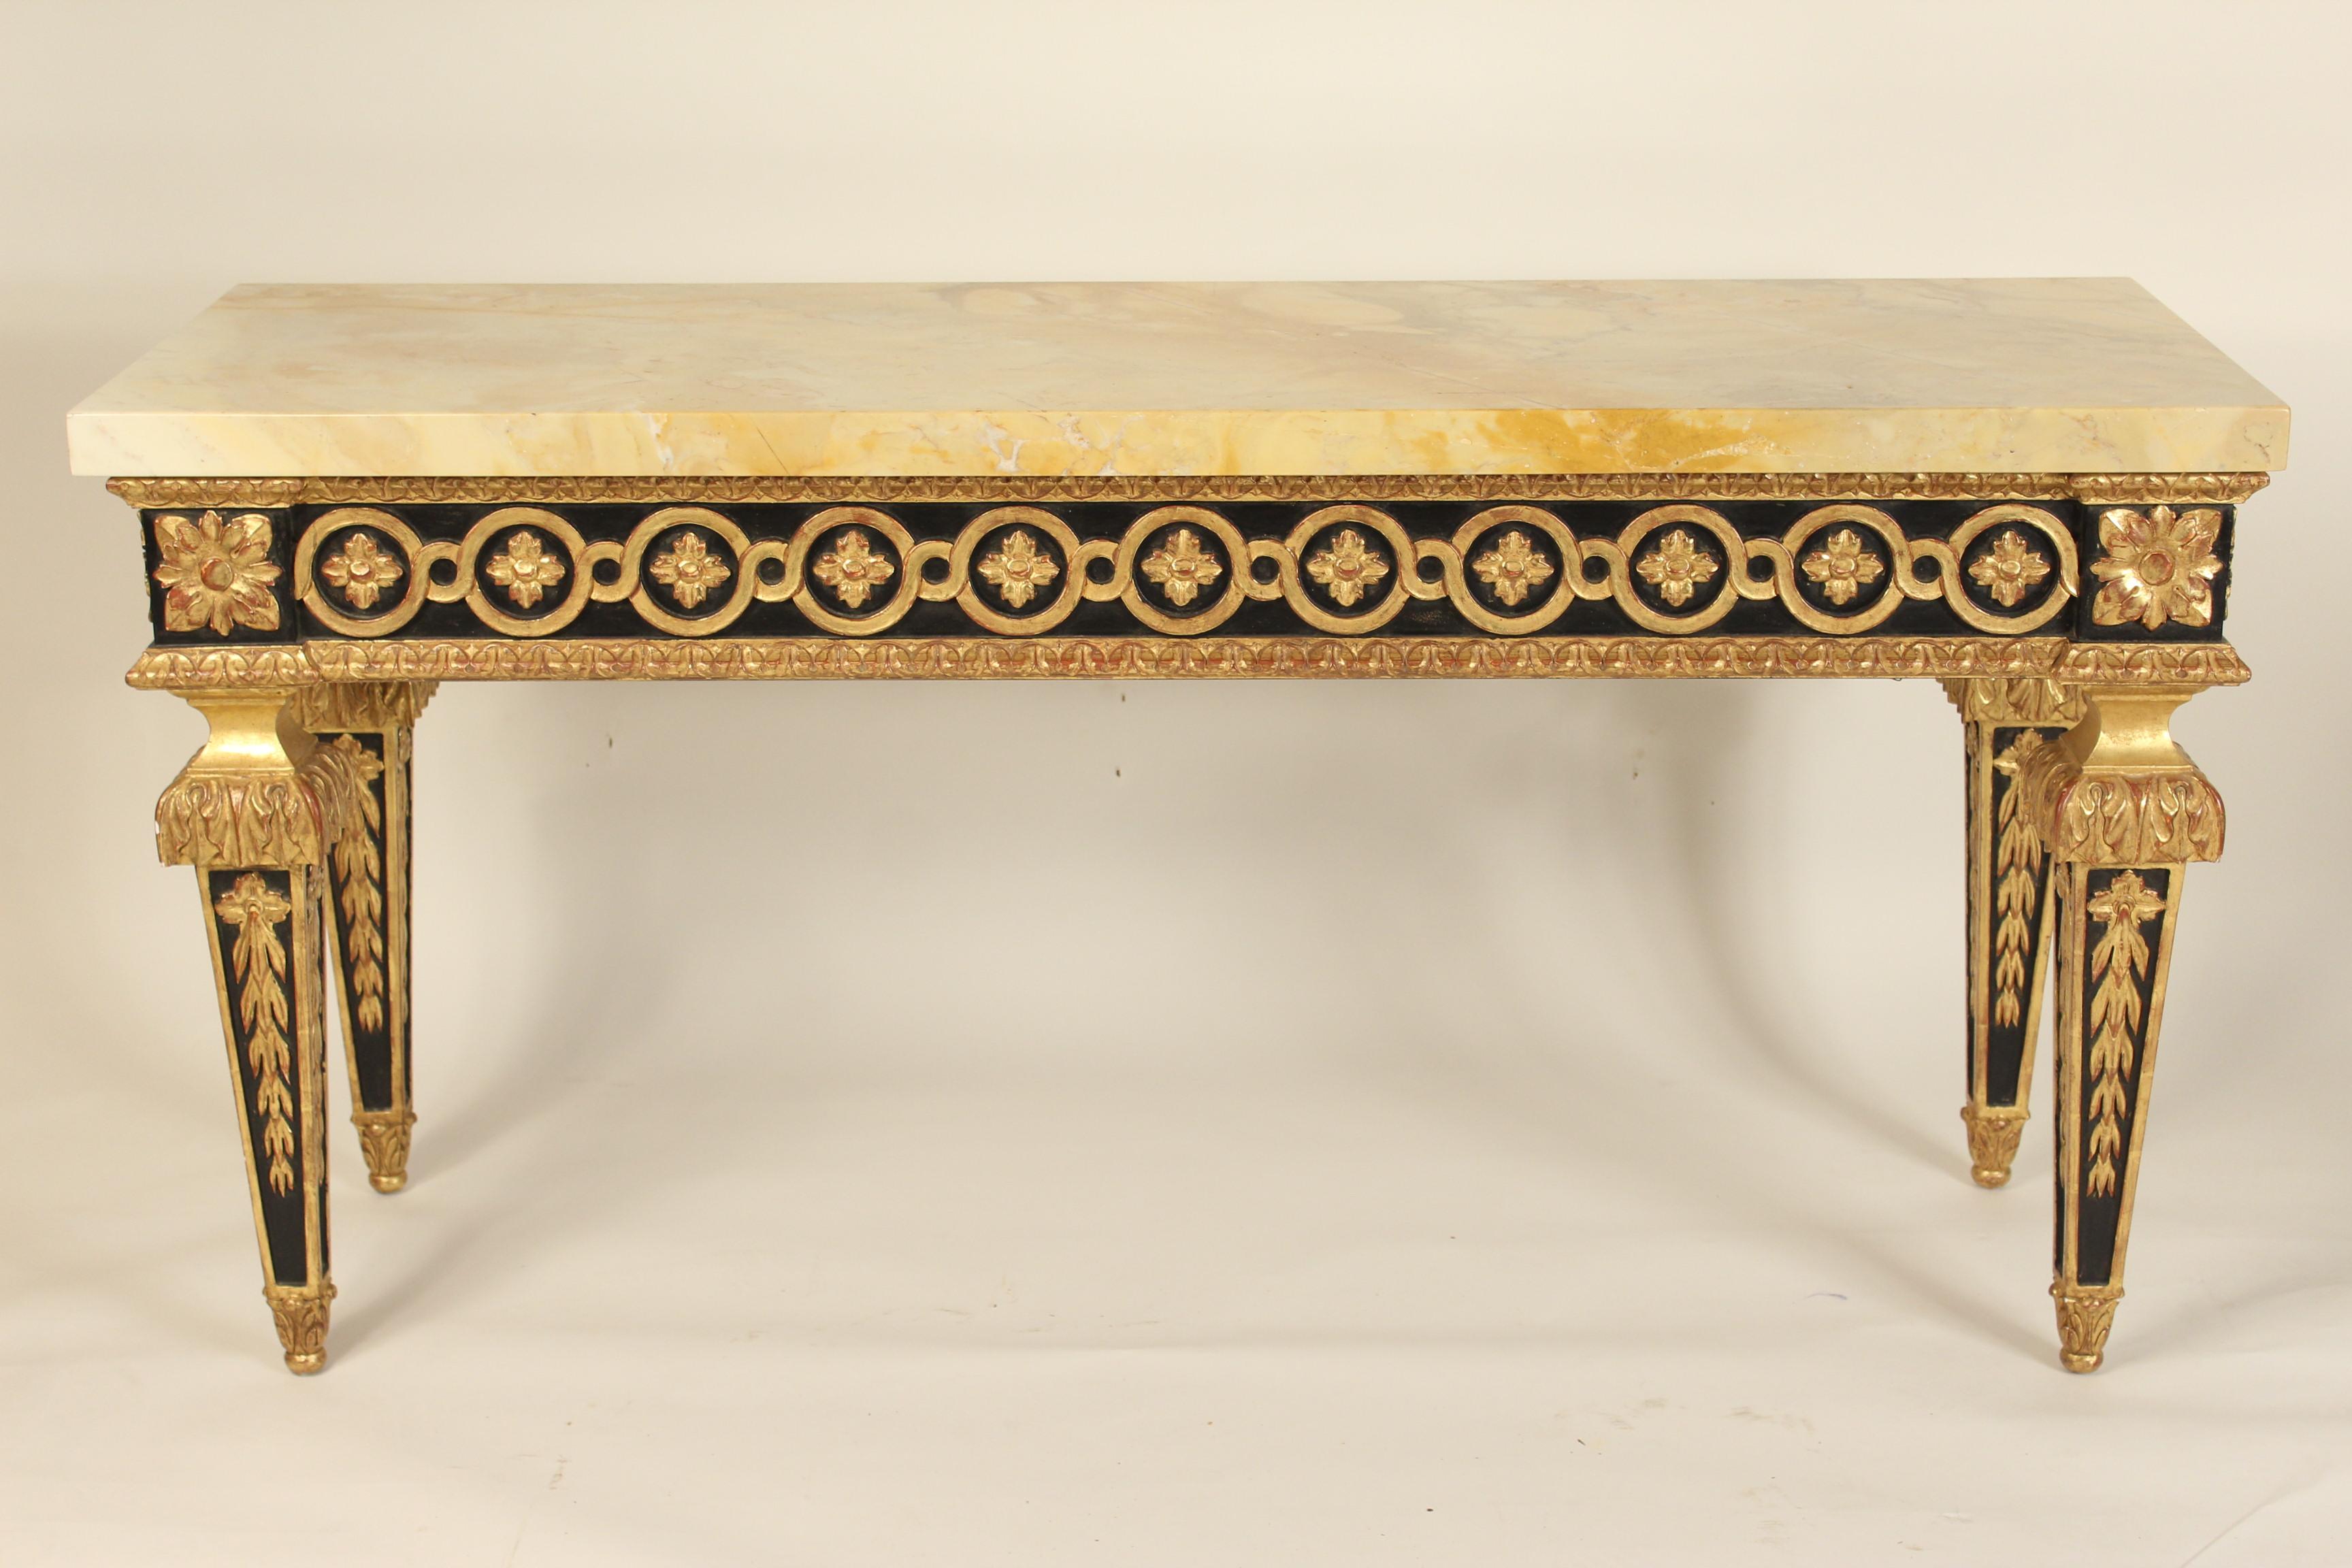 Unknown Pair of Continental Louis XVI Style Painted and Gilt Decorated Console Tables